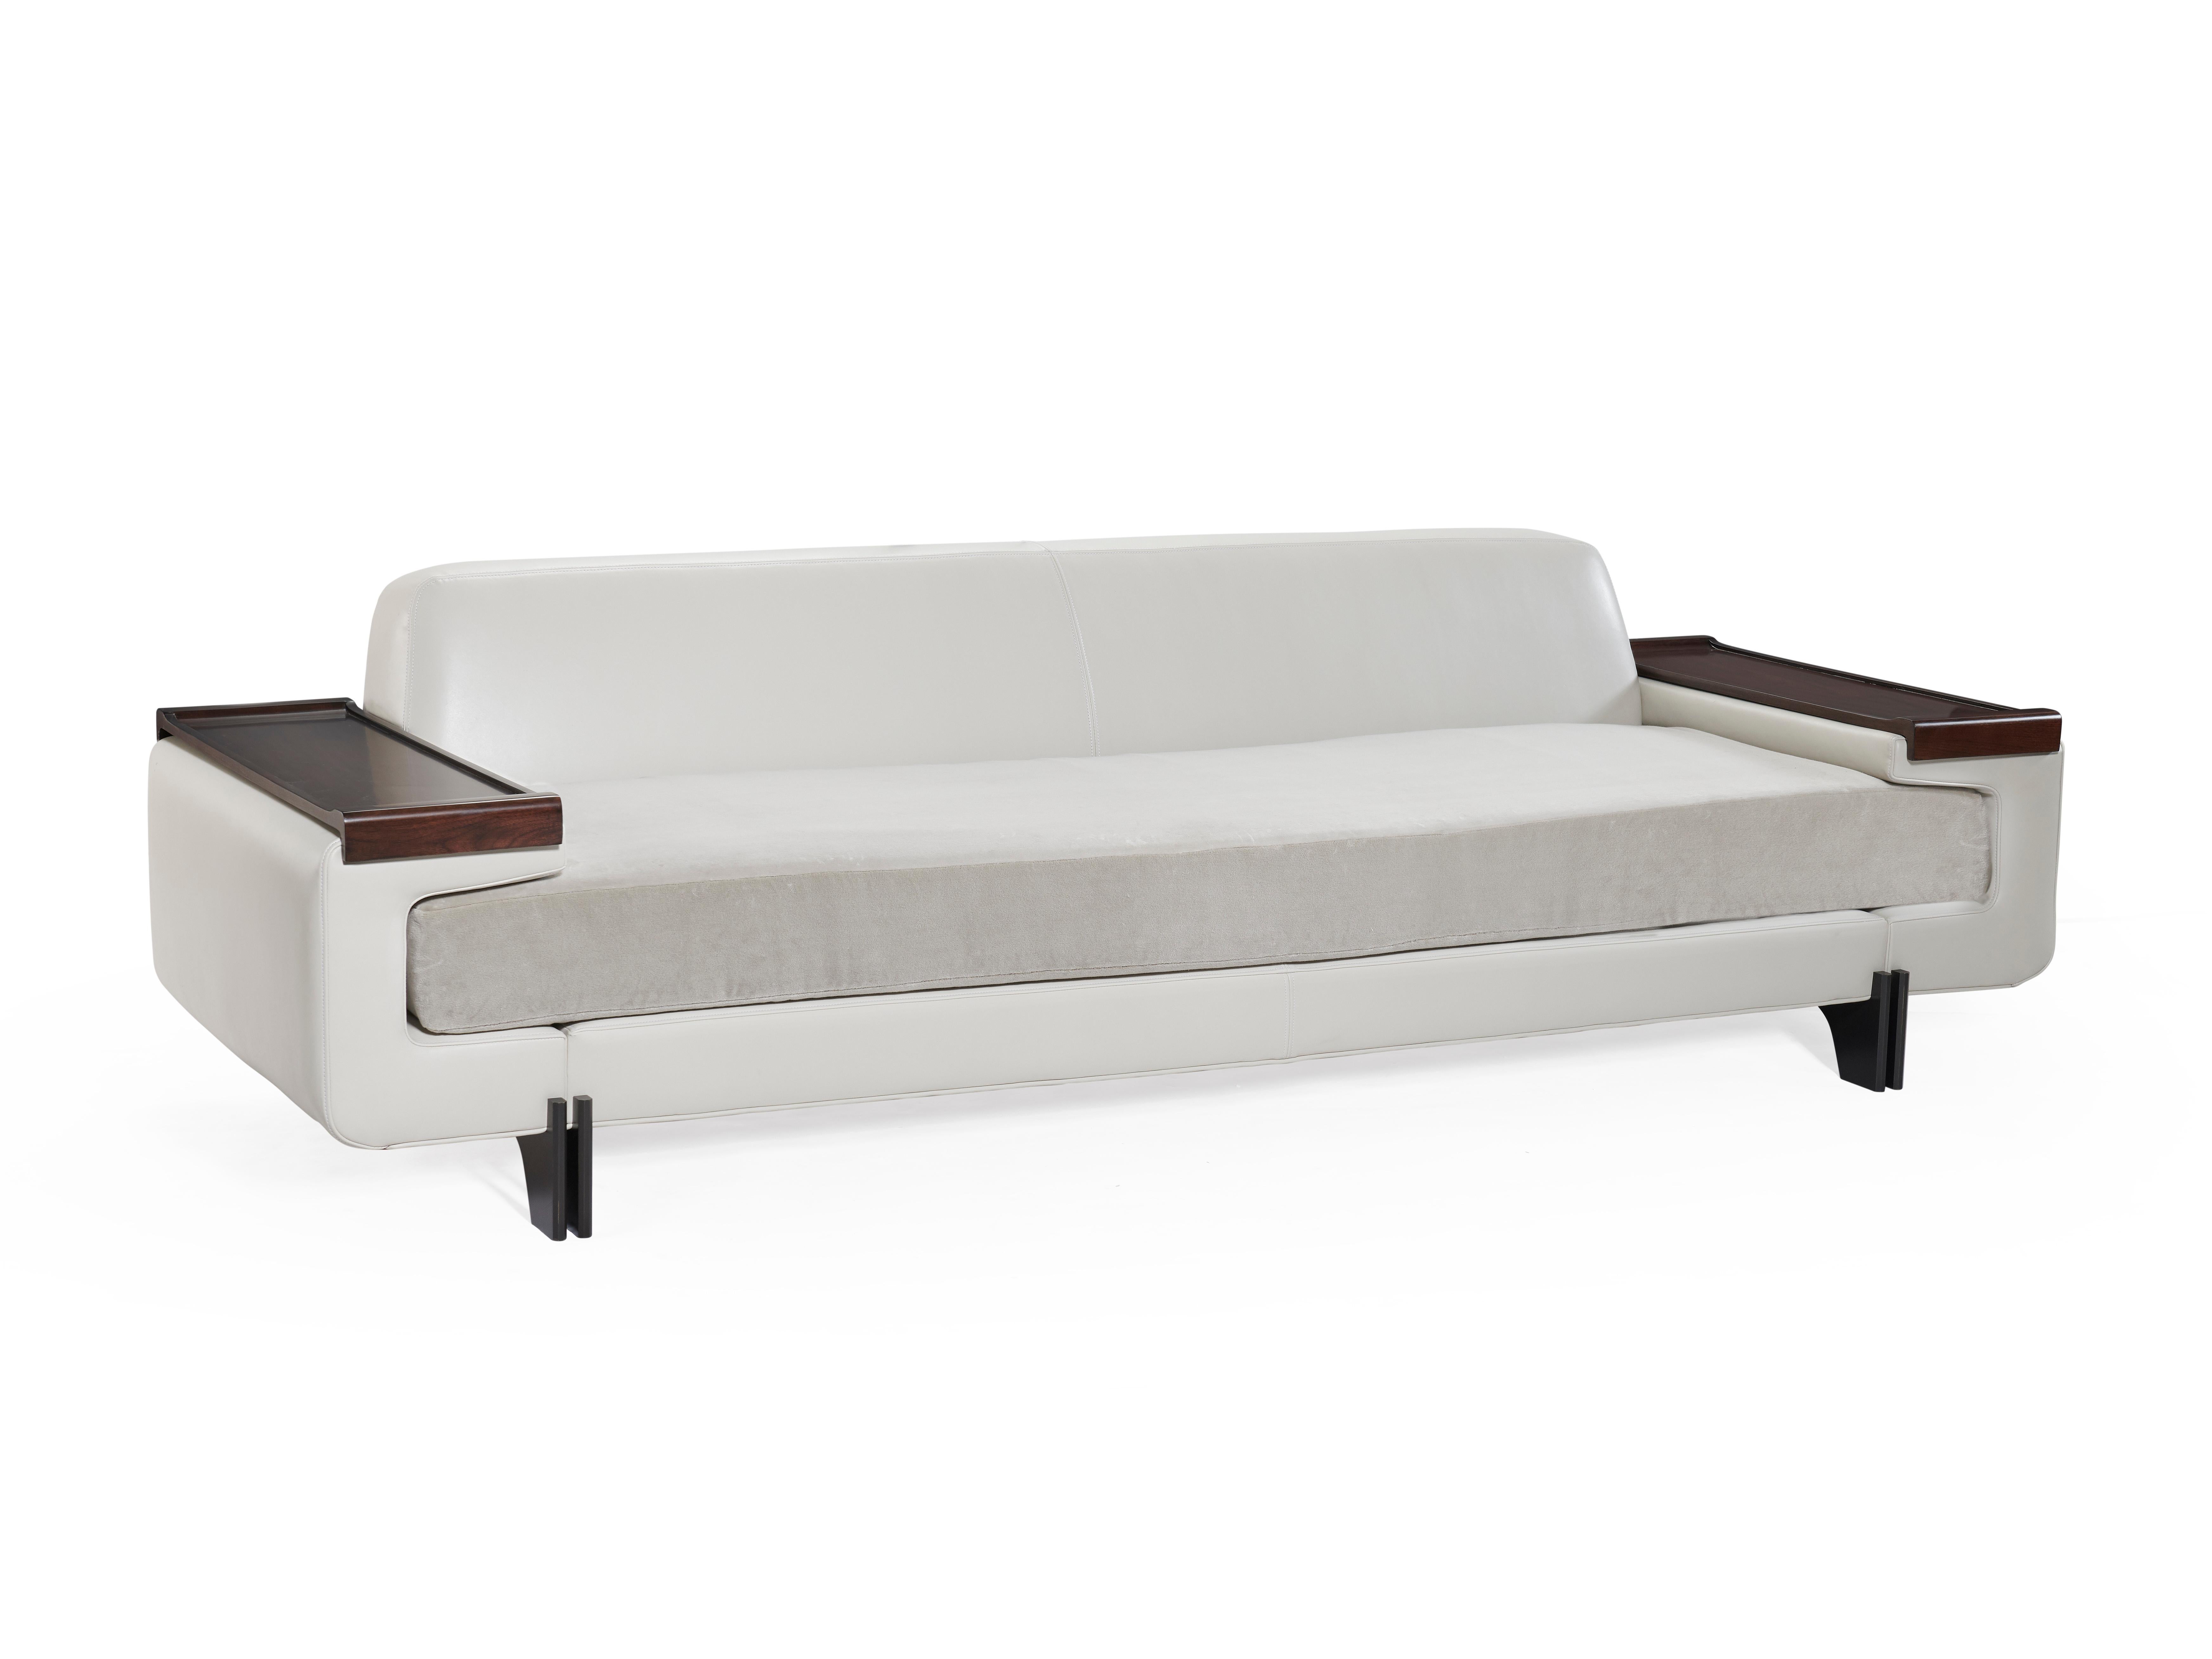 Phalanx loveseat exudes a grounded yet sensual sensibility, its seat is tenderly clasped by a fully upholstered frame which is elevated by patinated legs. Removable wooden trays nest on each arm making this design both sophisticated and practical.